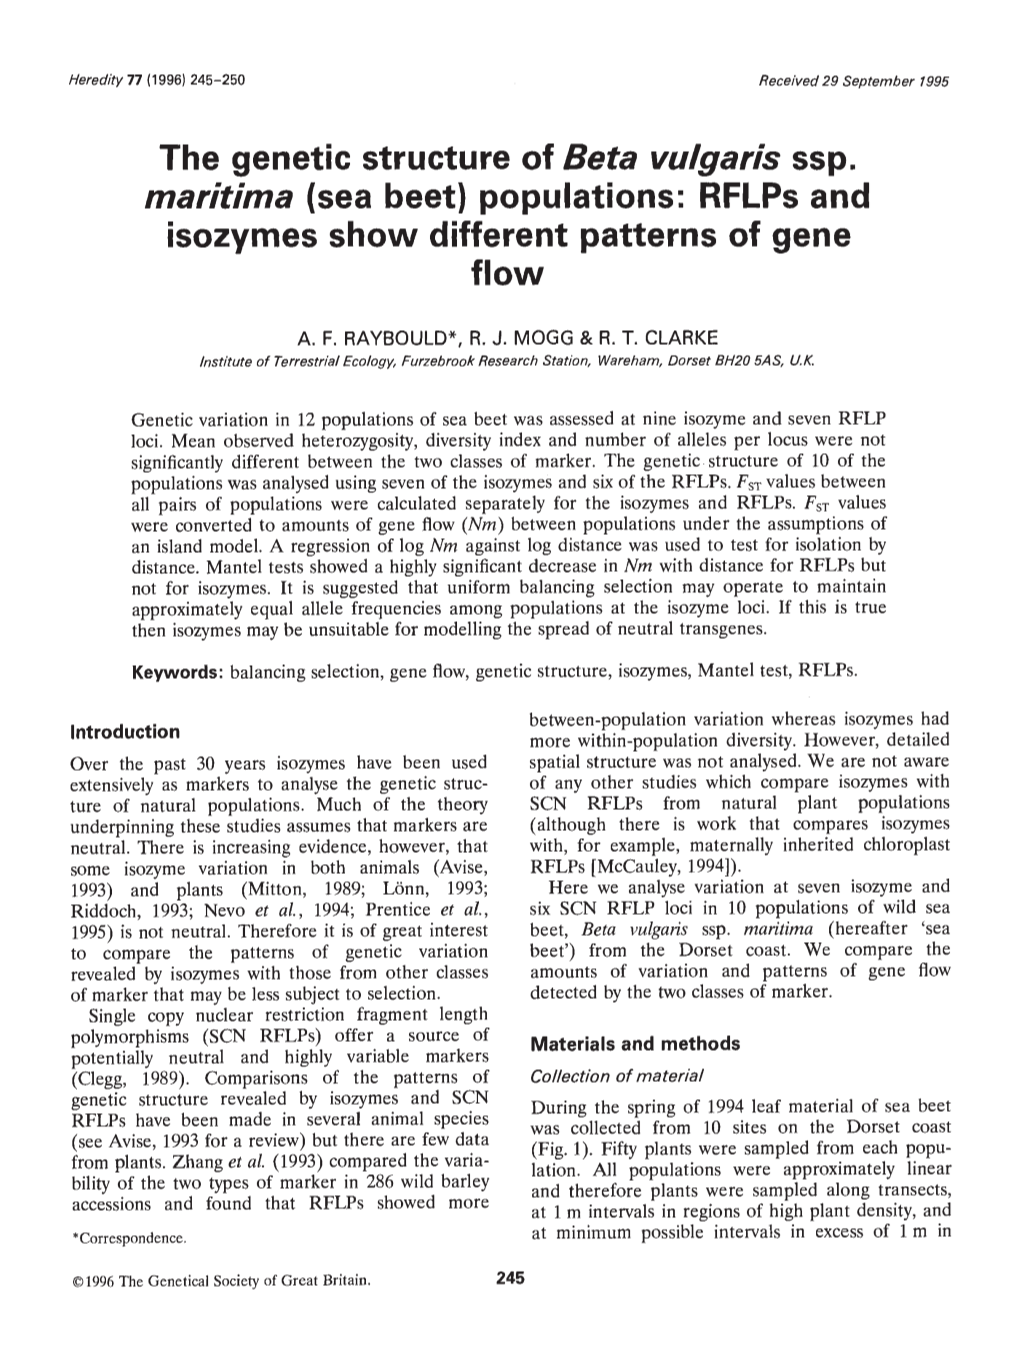 Isozymes Show Different Patterns of Gene Flow